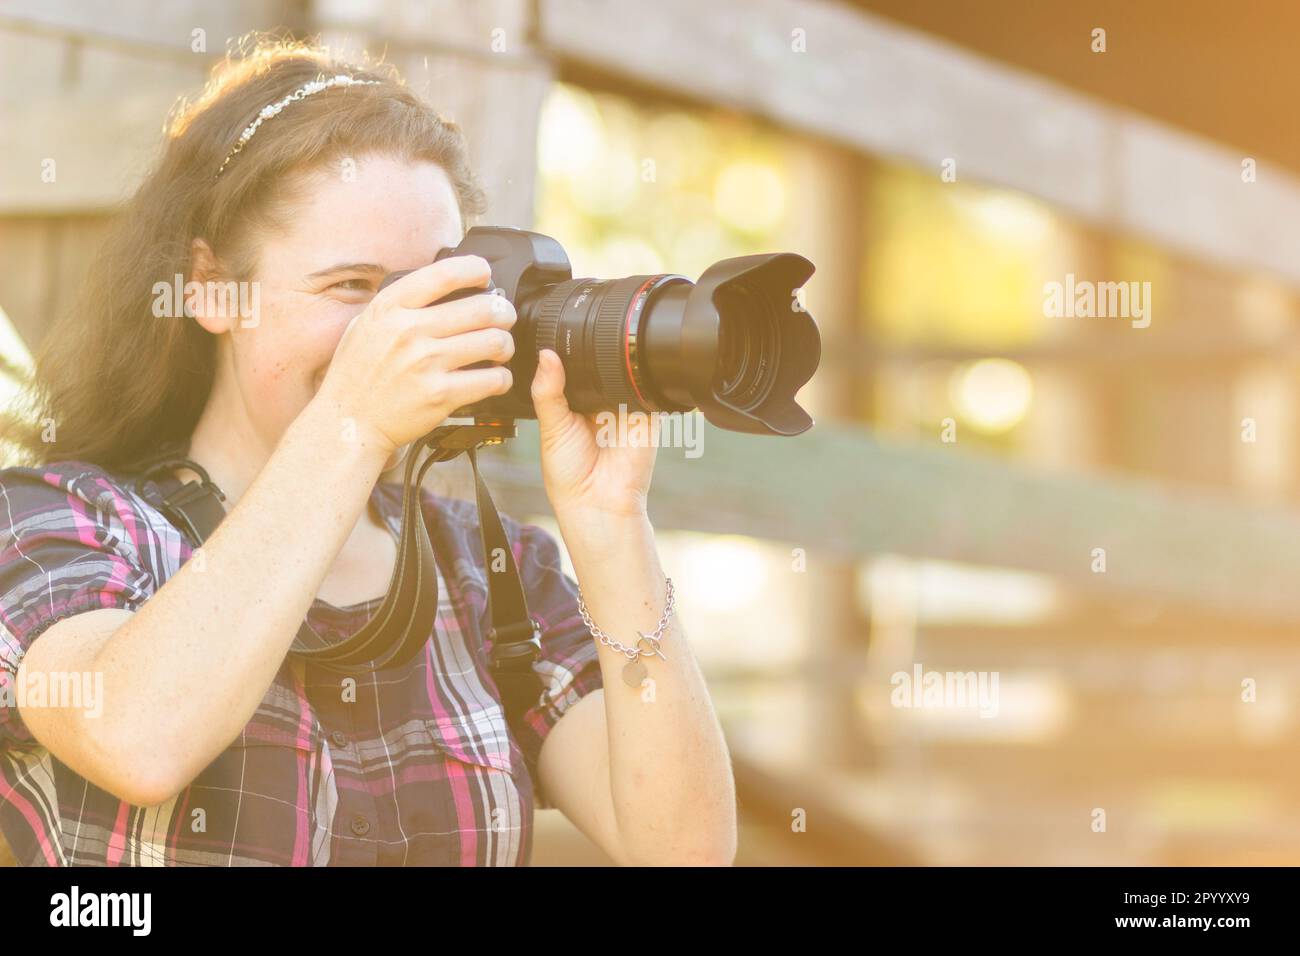 Happy young australian female photographer with DSLR camera taking photos in rural setting Stock Photo